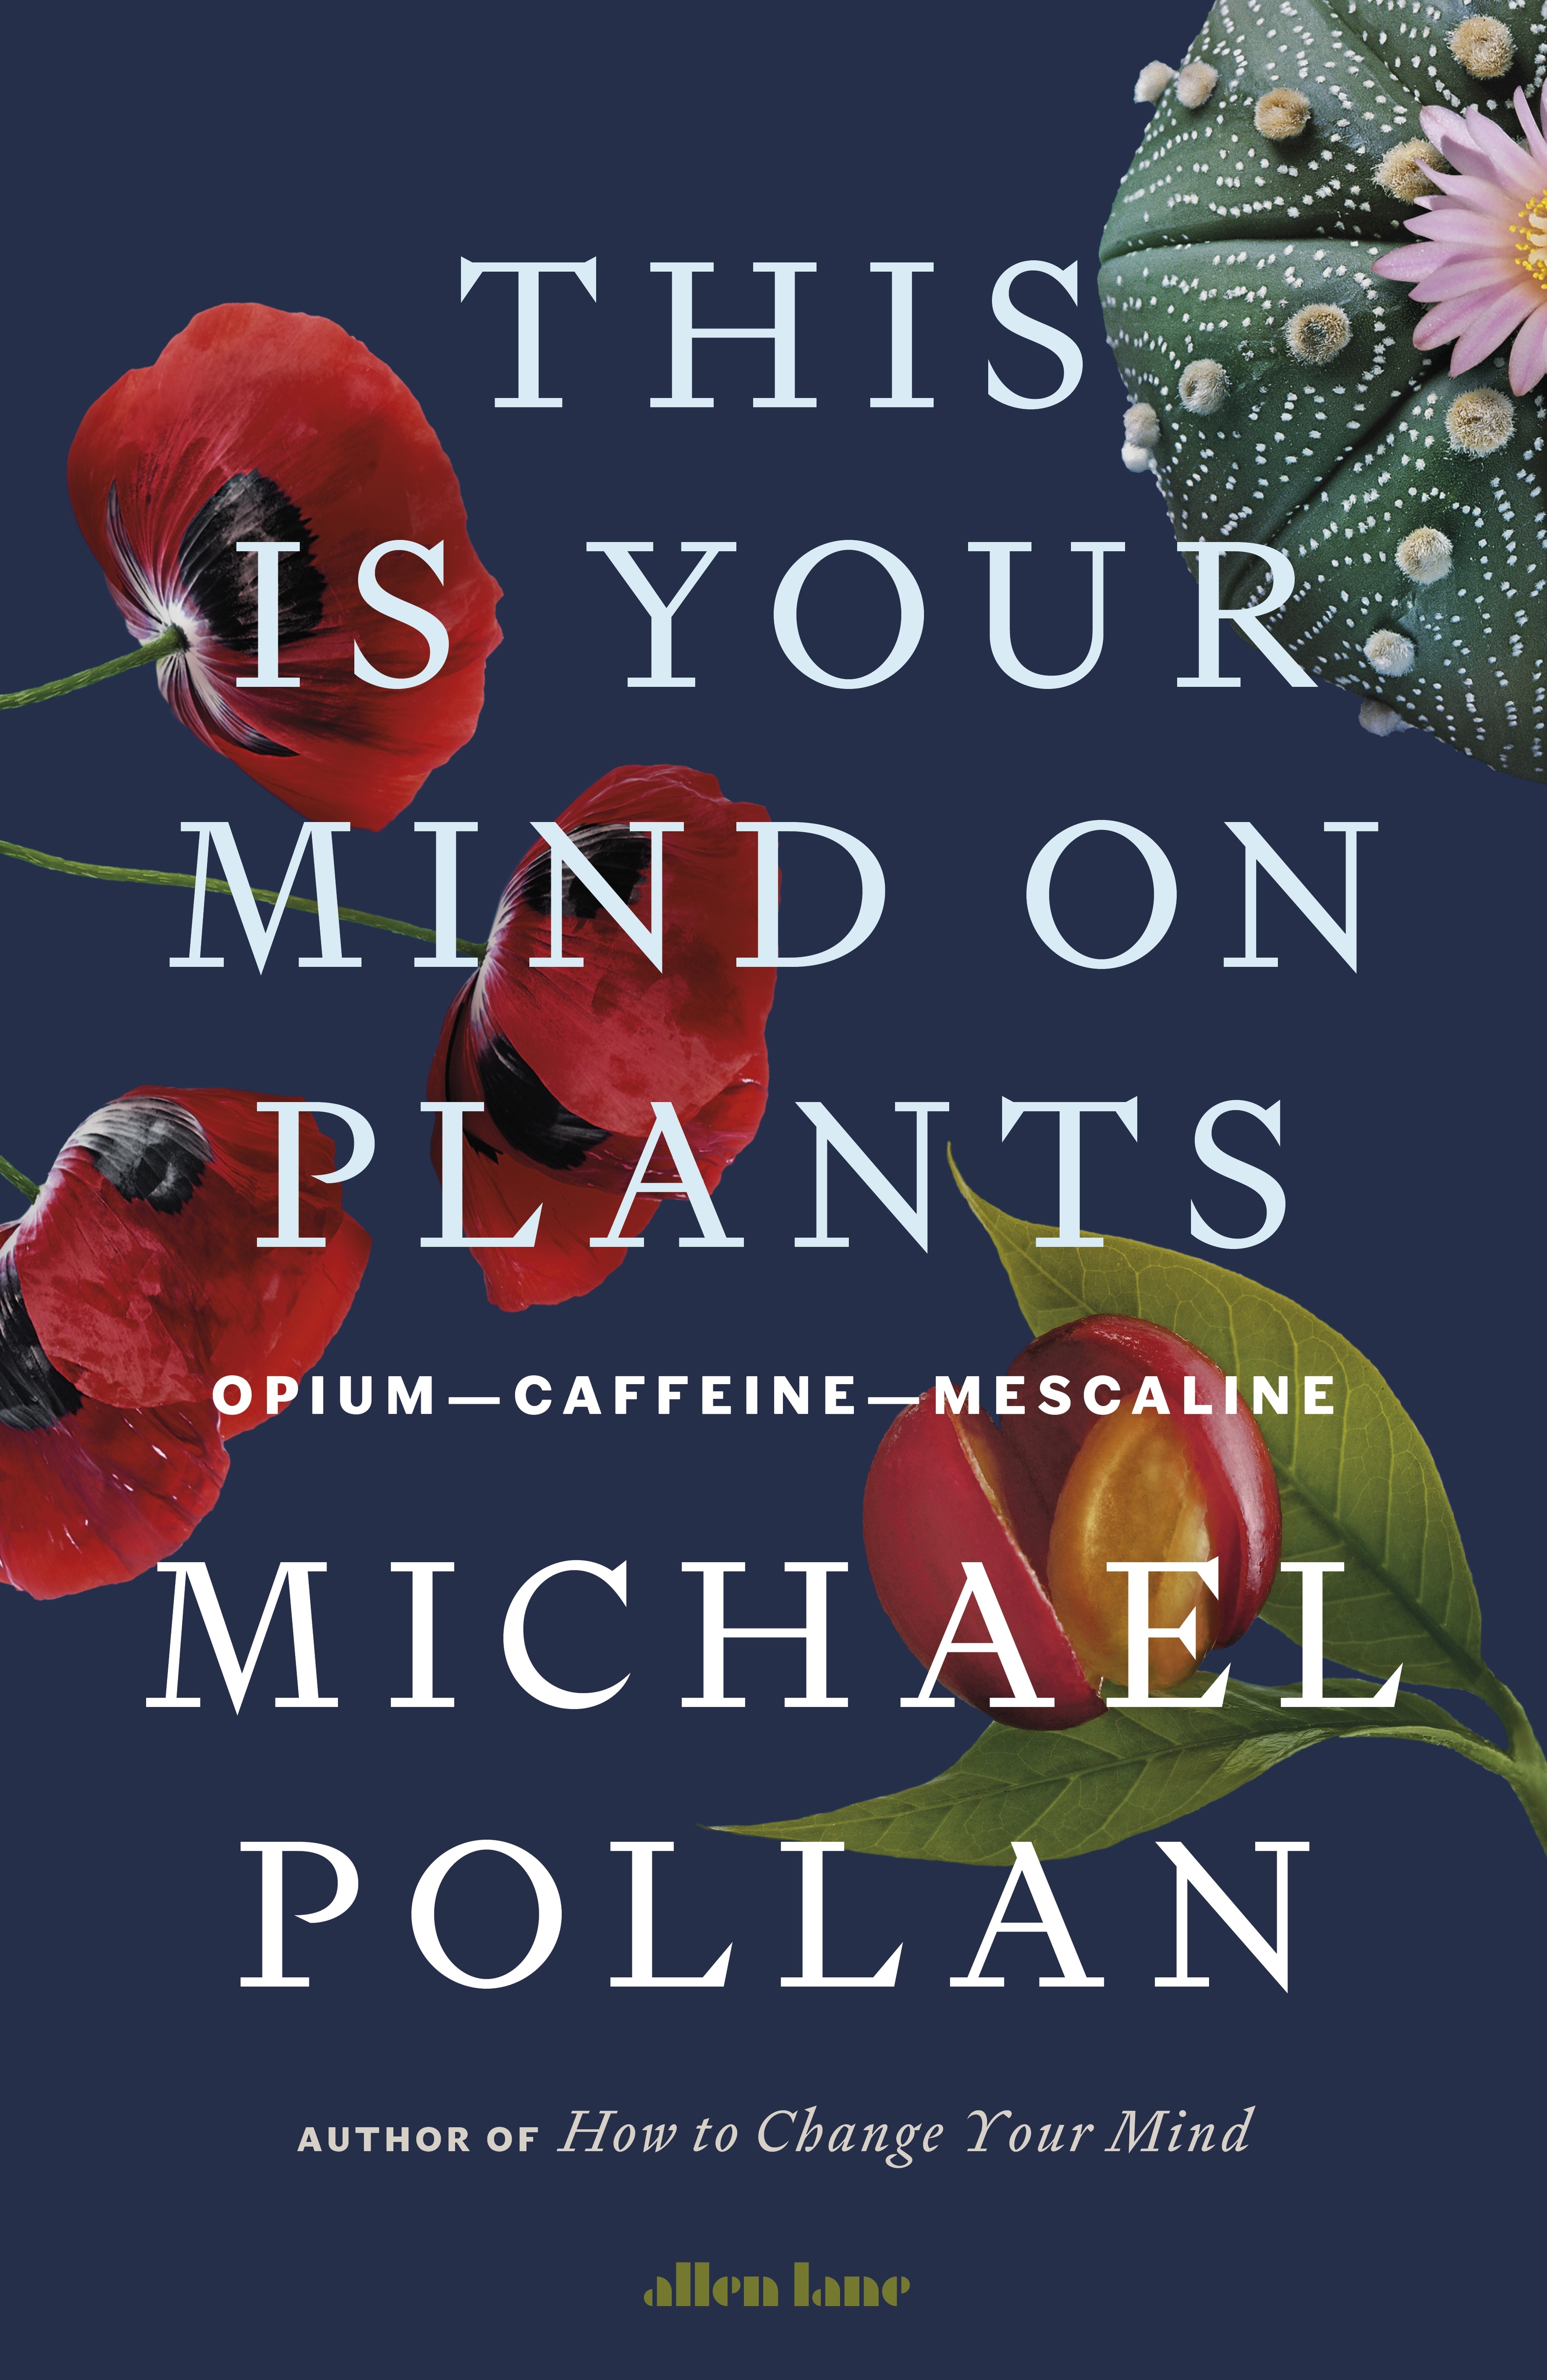 Book “This Is Your Mind On Plants” by Michael Pollan — July 8, 2021